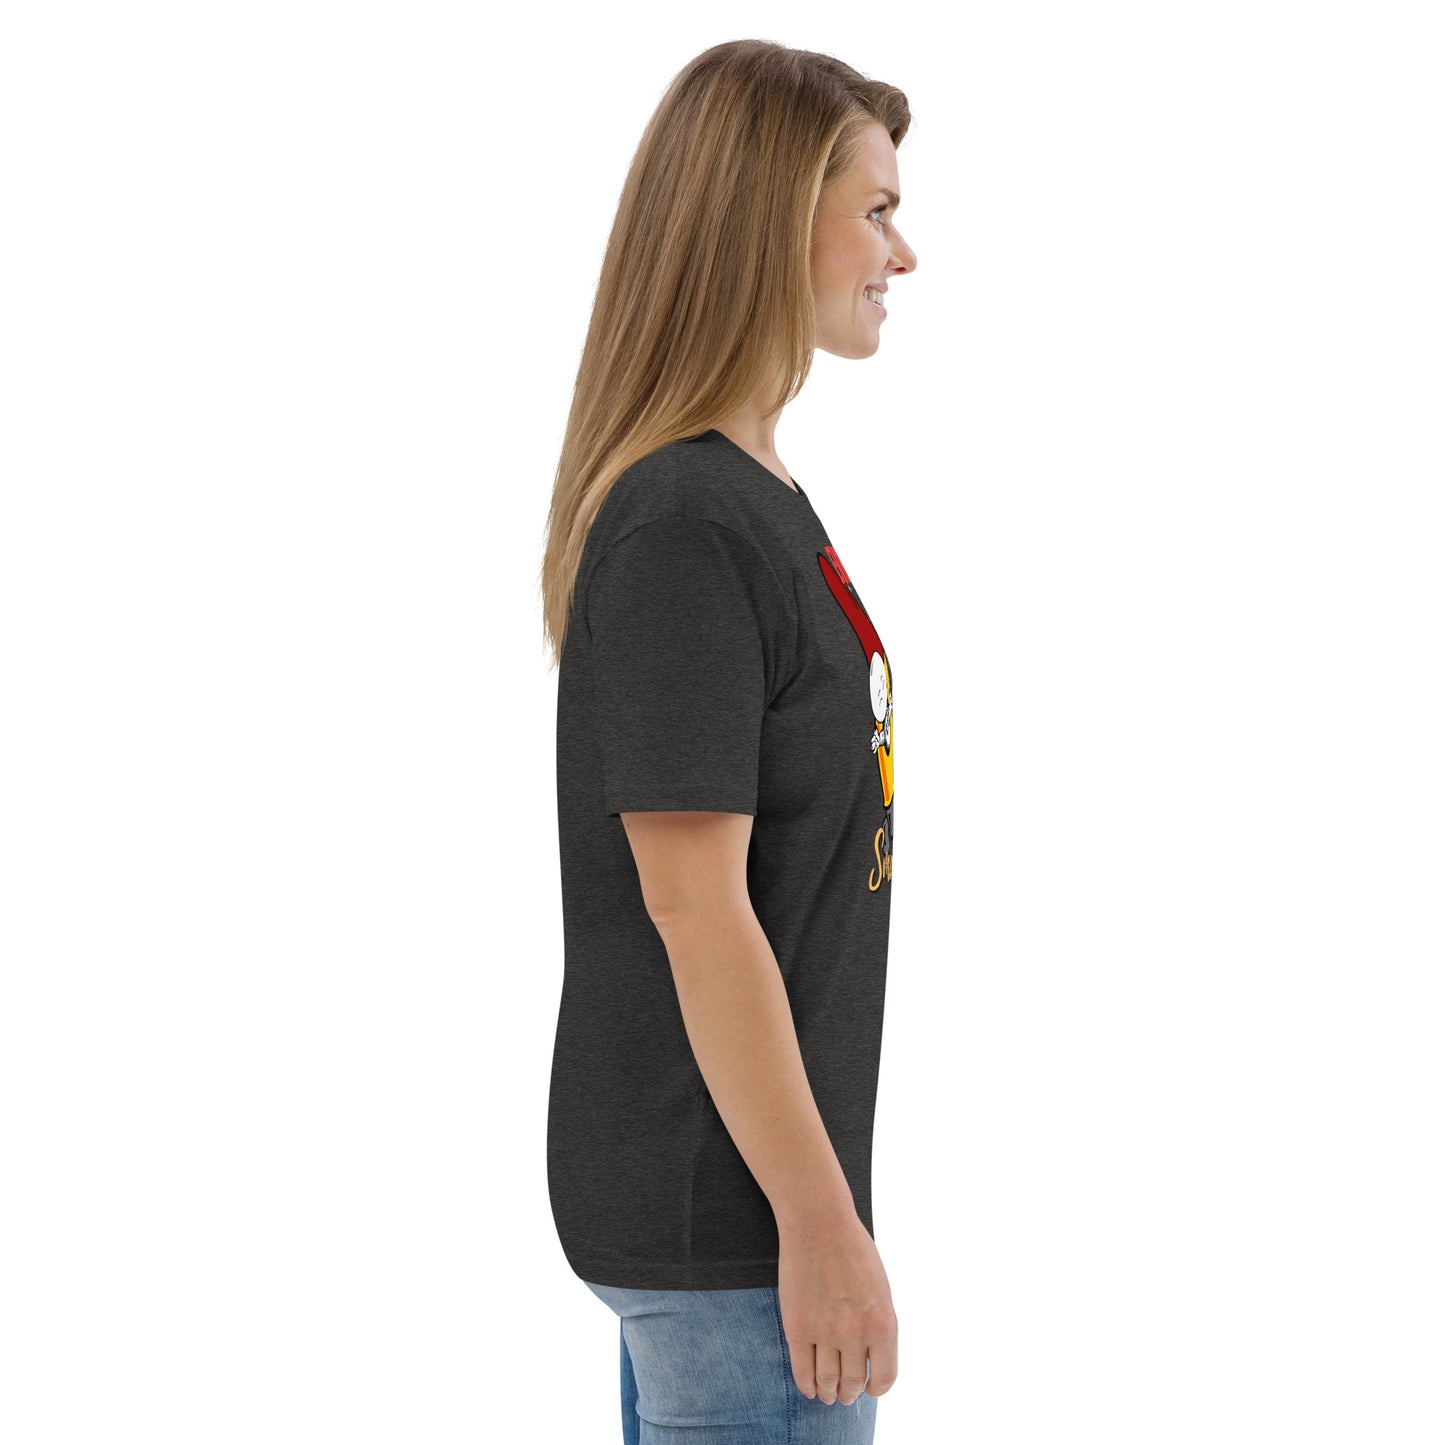 Everything Starts With A Small Step : Unisex organic cotton t-shirt